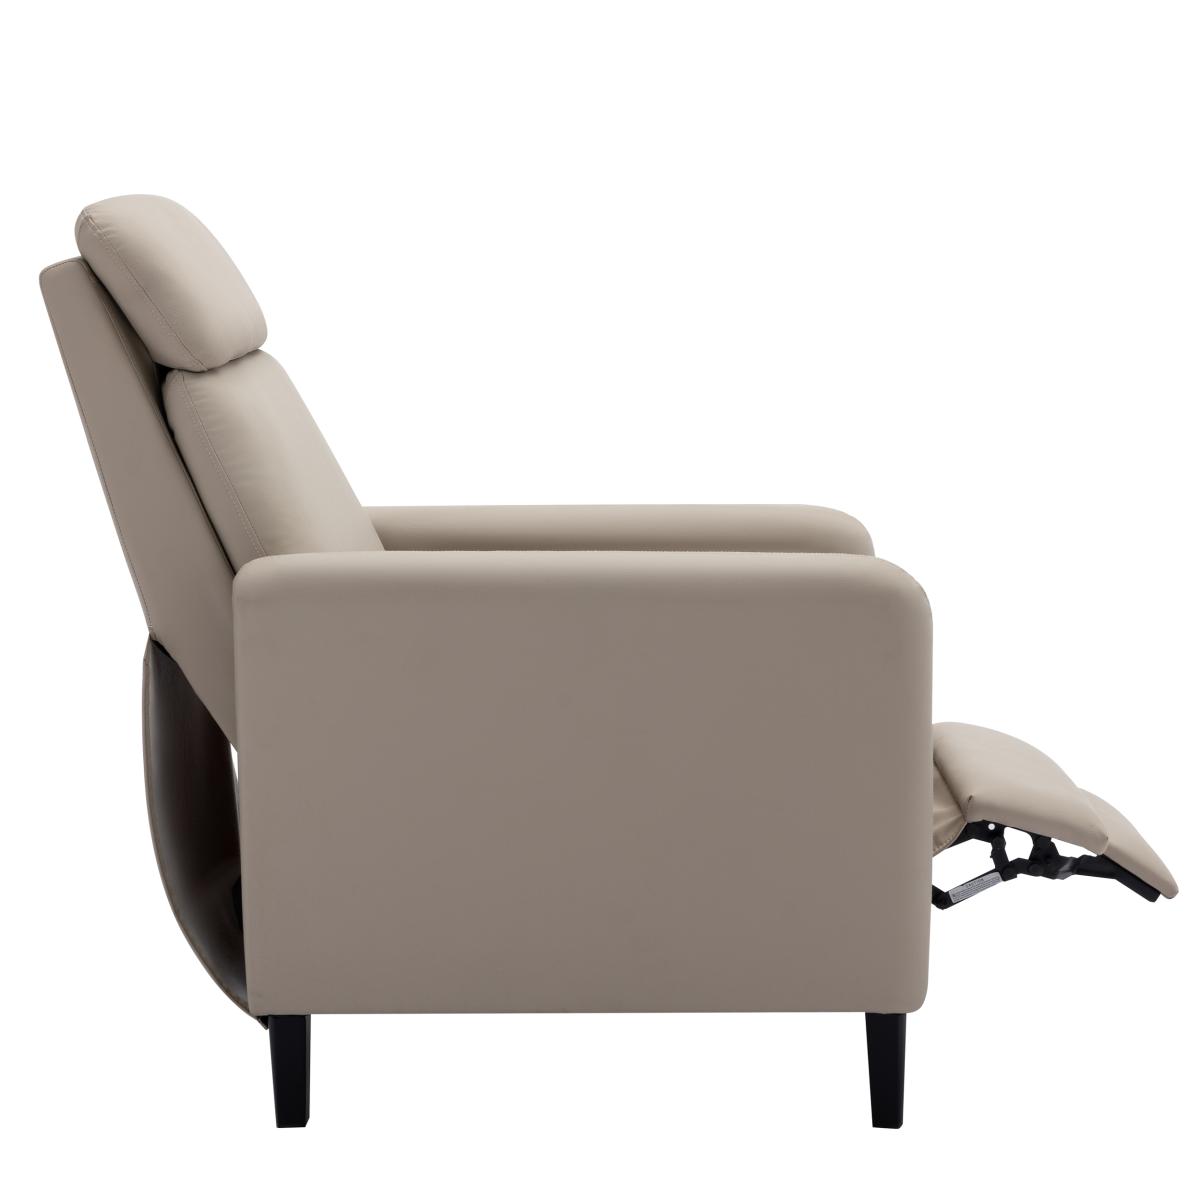 Modern Artistic Color Design Adjustable Recliner Chair Pu Leather for Living Room Bedroom Home Theater, Beige